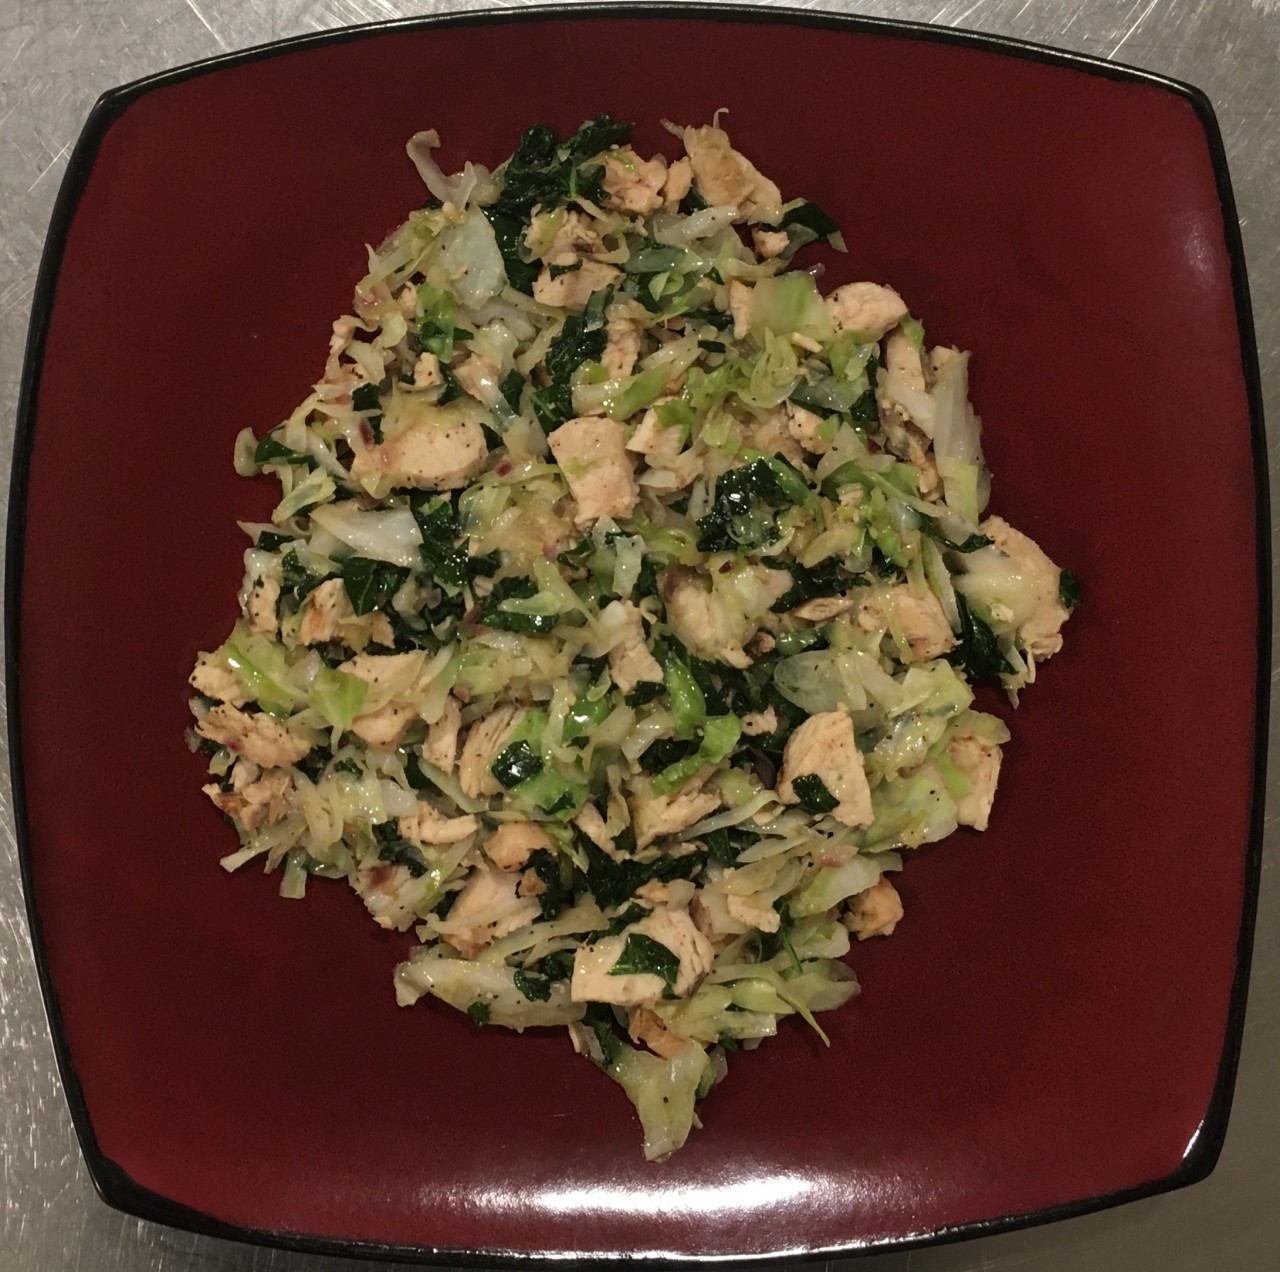 <a class="bx-tag" rel="tag" href="https://streetloc.com/view-channel-profile/whatsfordinner"><s>#</s><b>whatsfordinner</b></a> Sliced Grilled Chicken, Butter Sautéed with Red Onion, Green Cabbage, and Kale. <a class="bx-tag" rel="tag" href="https://streetloc.com/view-channel-profile/keto"><s>#</s><b>keto</b></a> <a class="bx-tag" rel="tag" href="https://streetloc.com/view-channel-profile/healthyeats"><s>#</s><b>healthyeats</b></a> <a class="bx-tag" rel="tag" href="https://streetloc.com/view-channel-profile/healthmito"><s>#</s><b>healthmito</b></a>